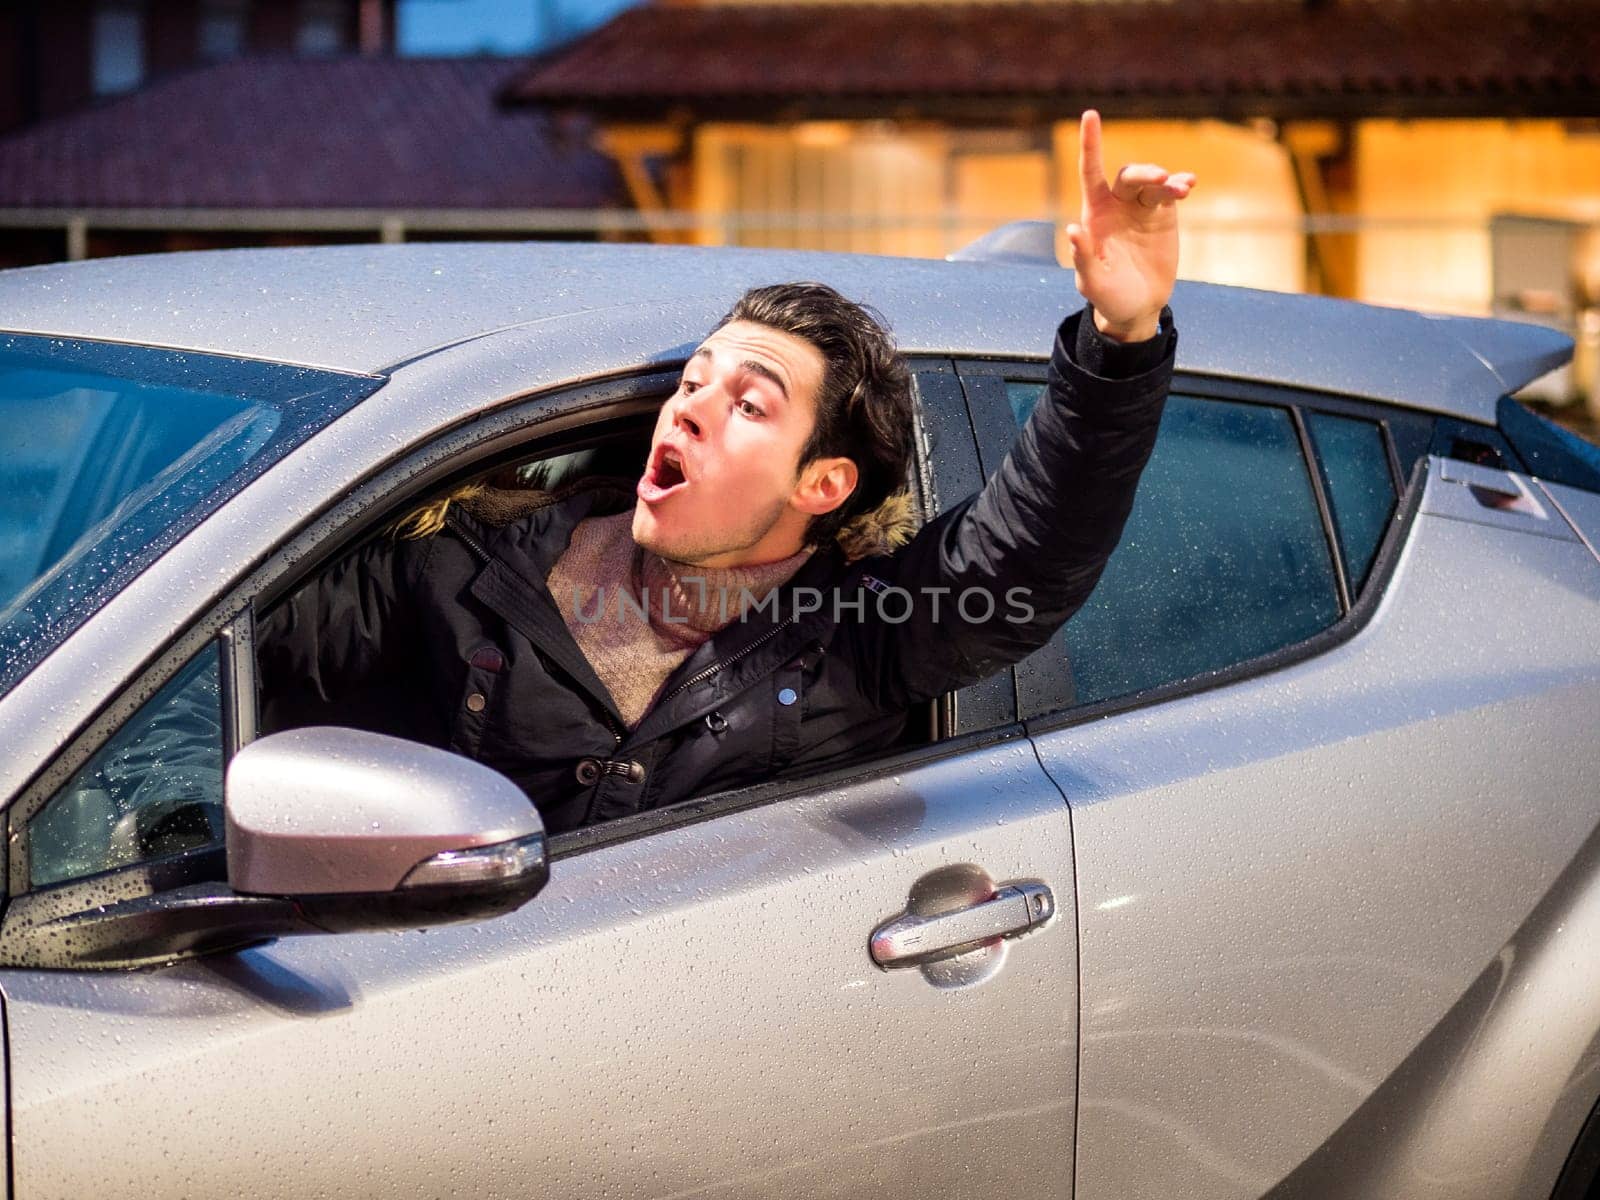 Photo of a man driving a car with his hand raised in the air by artofphoto